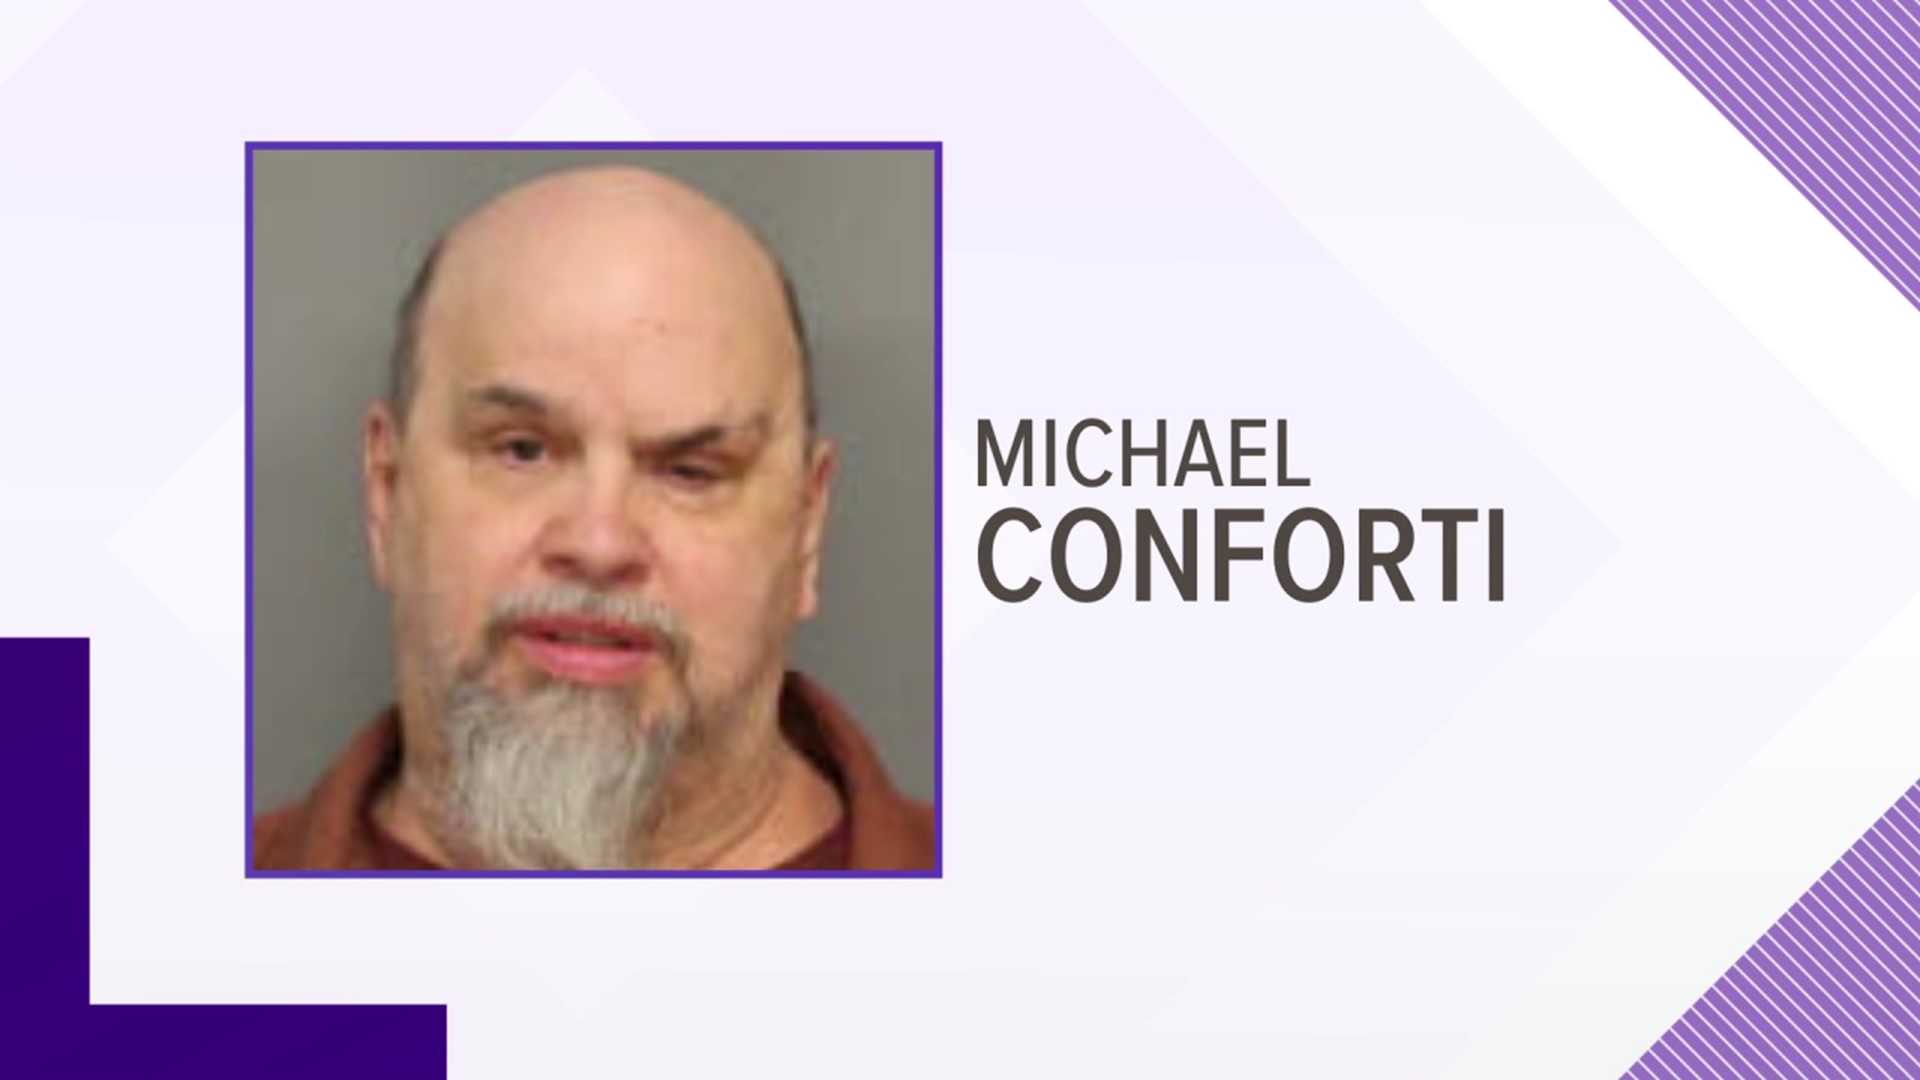 Michael Conforti was one of two men convicted of murdering Kathleen Harbison in Wayne County in December of 1990.